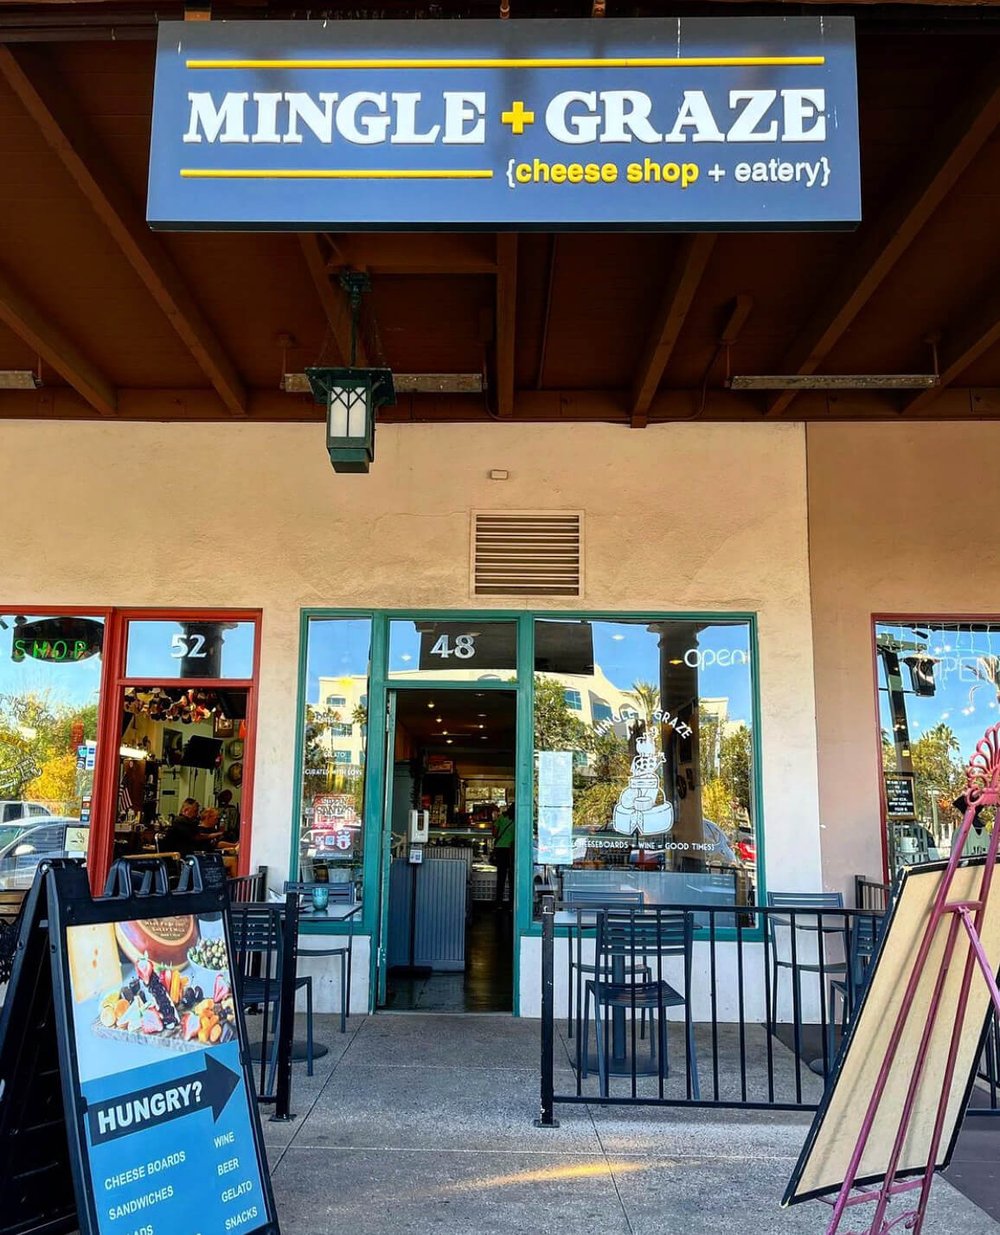 Mingle + Graze cheese shop and eatery